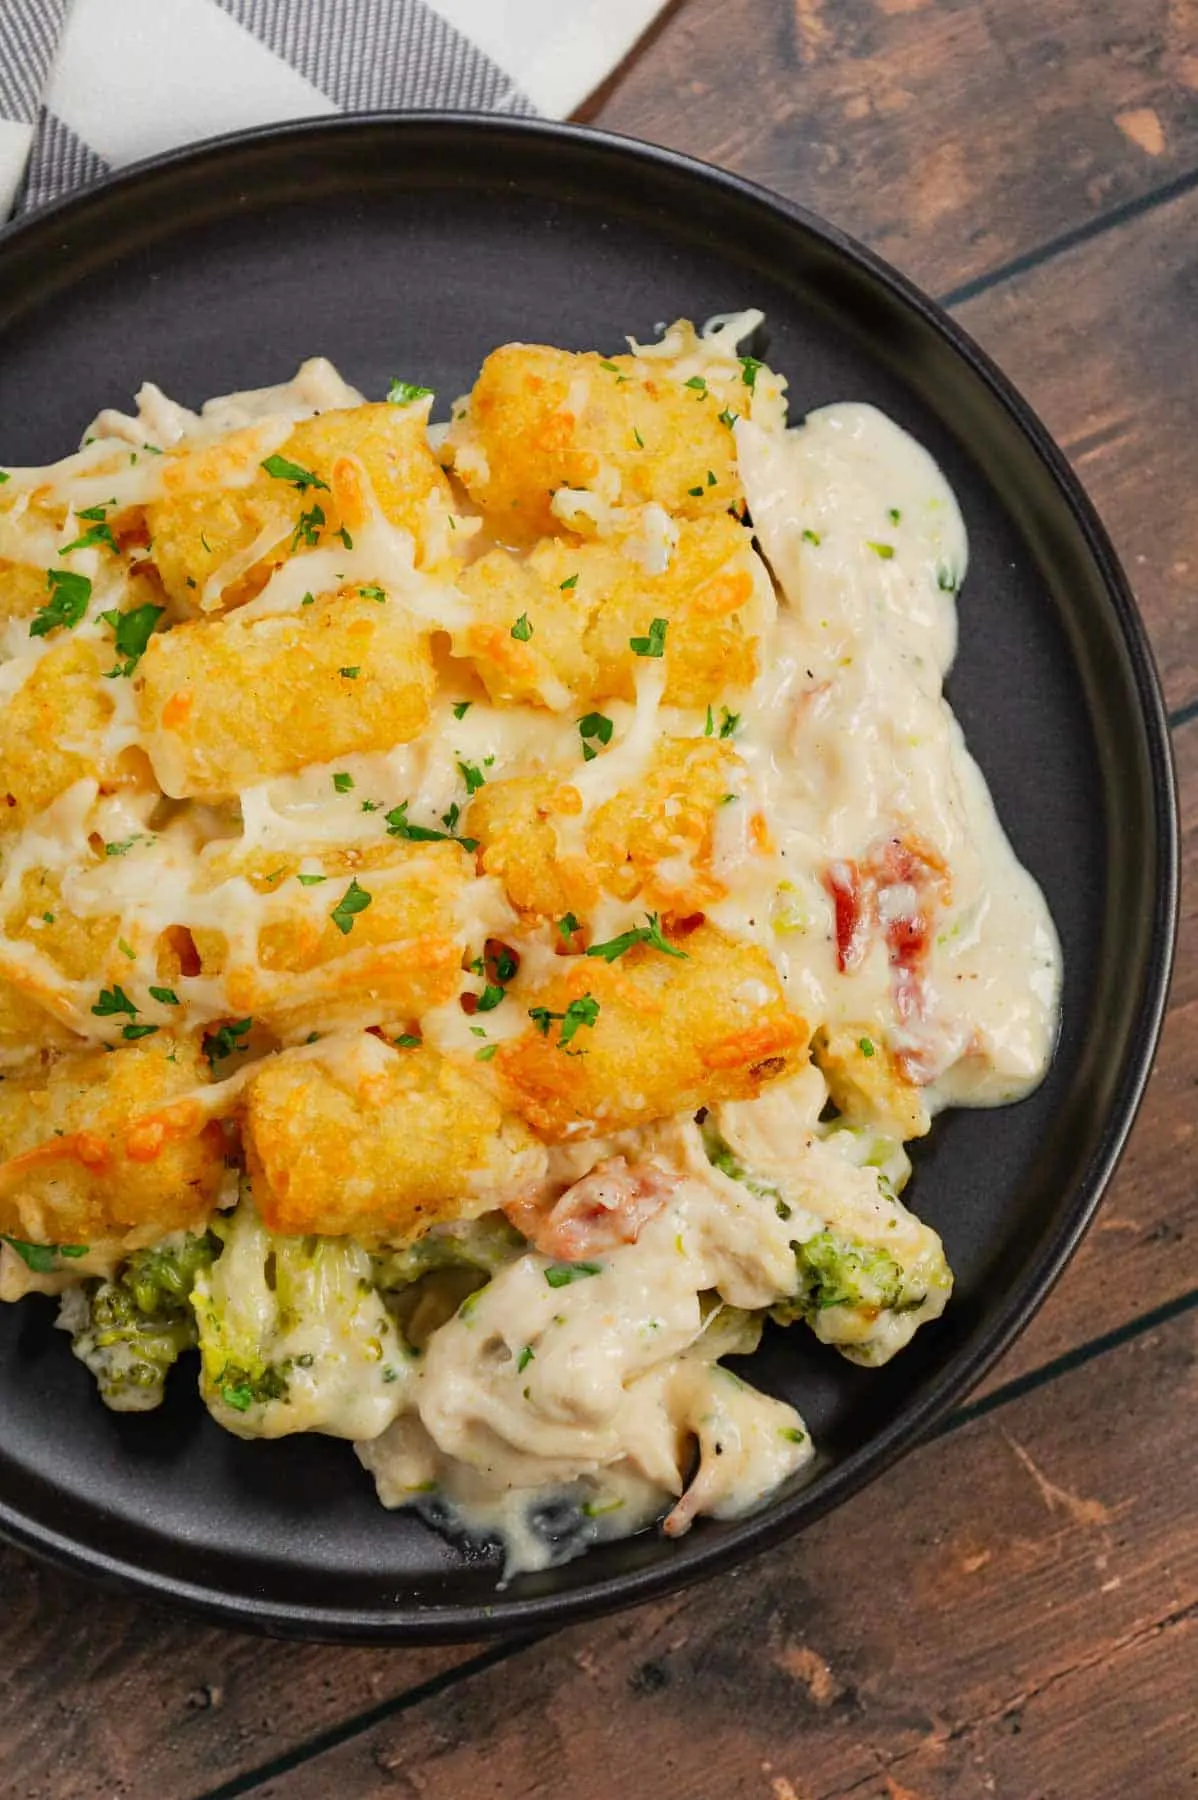 Chicken Alfredo Tater Tot Casserole is a hearty dish loaded with shredded rotisserie chicken, chopped bacon, broccoli, Alfredo sauce, parmesan and mozzarella topped with tater tots baked until golden brown and crispy.